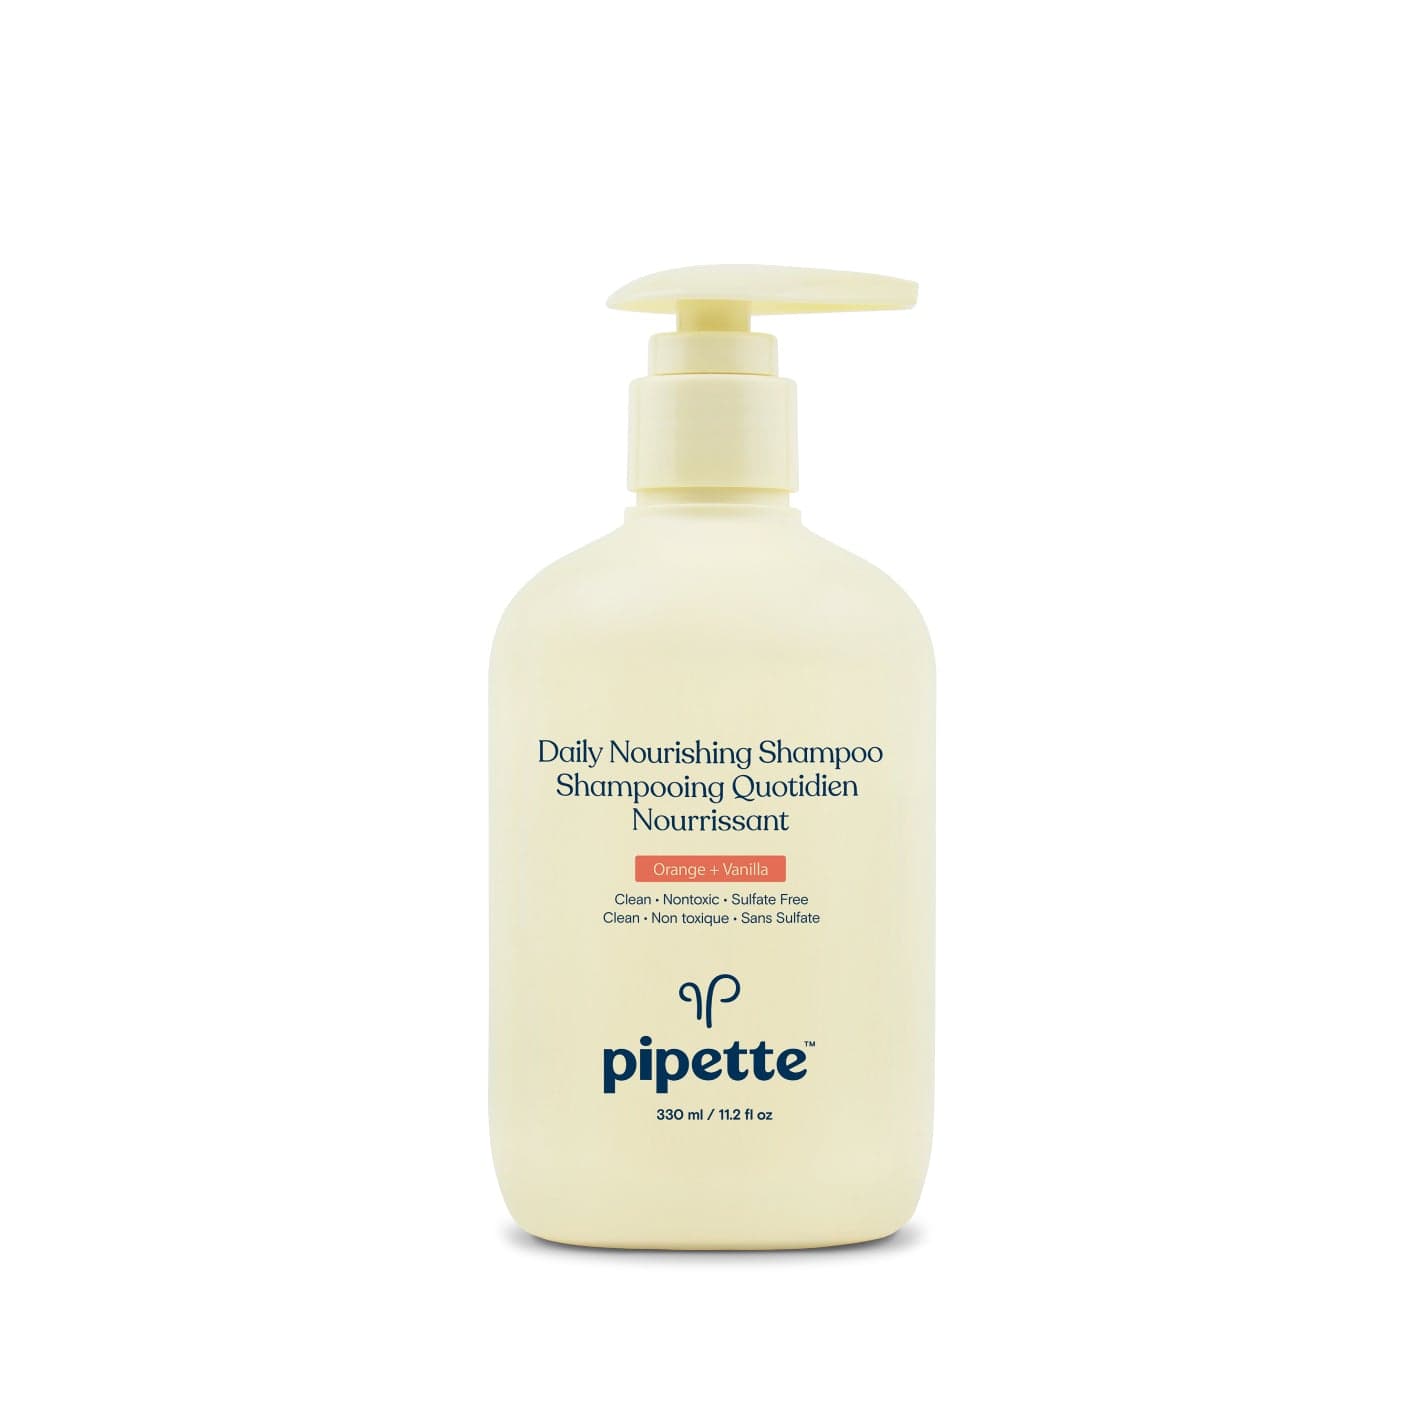 daily nourishing shampoo by pipette baby